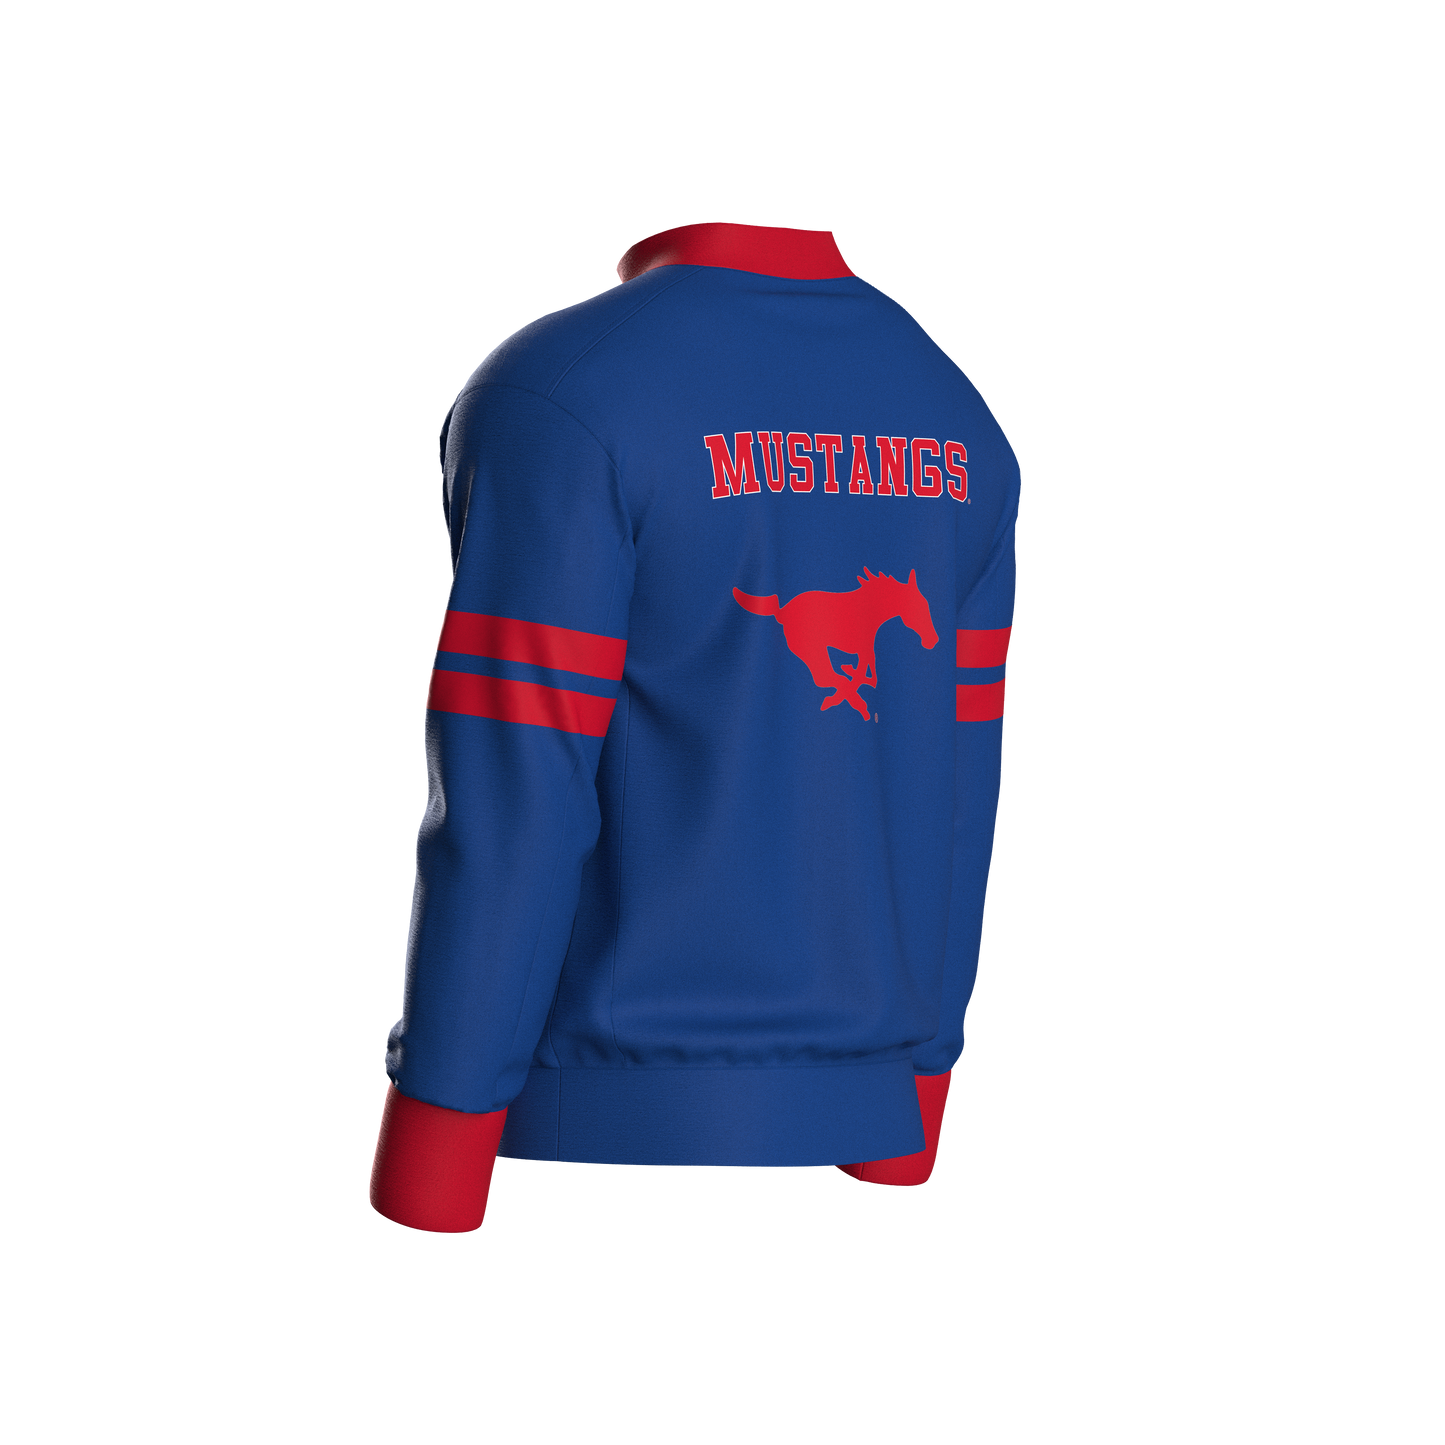 SMU Home Pullover (adult)